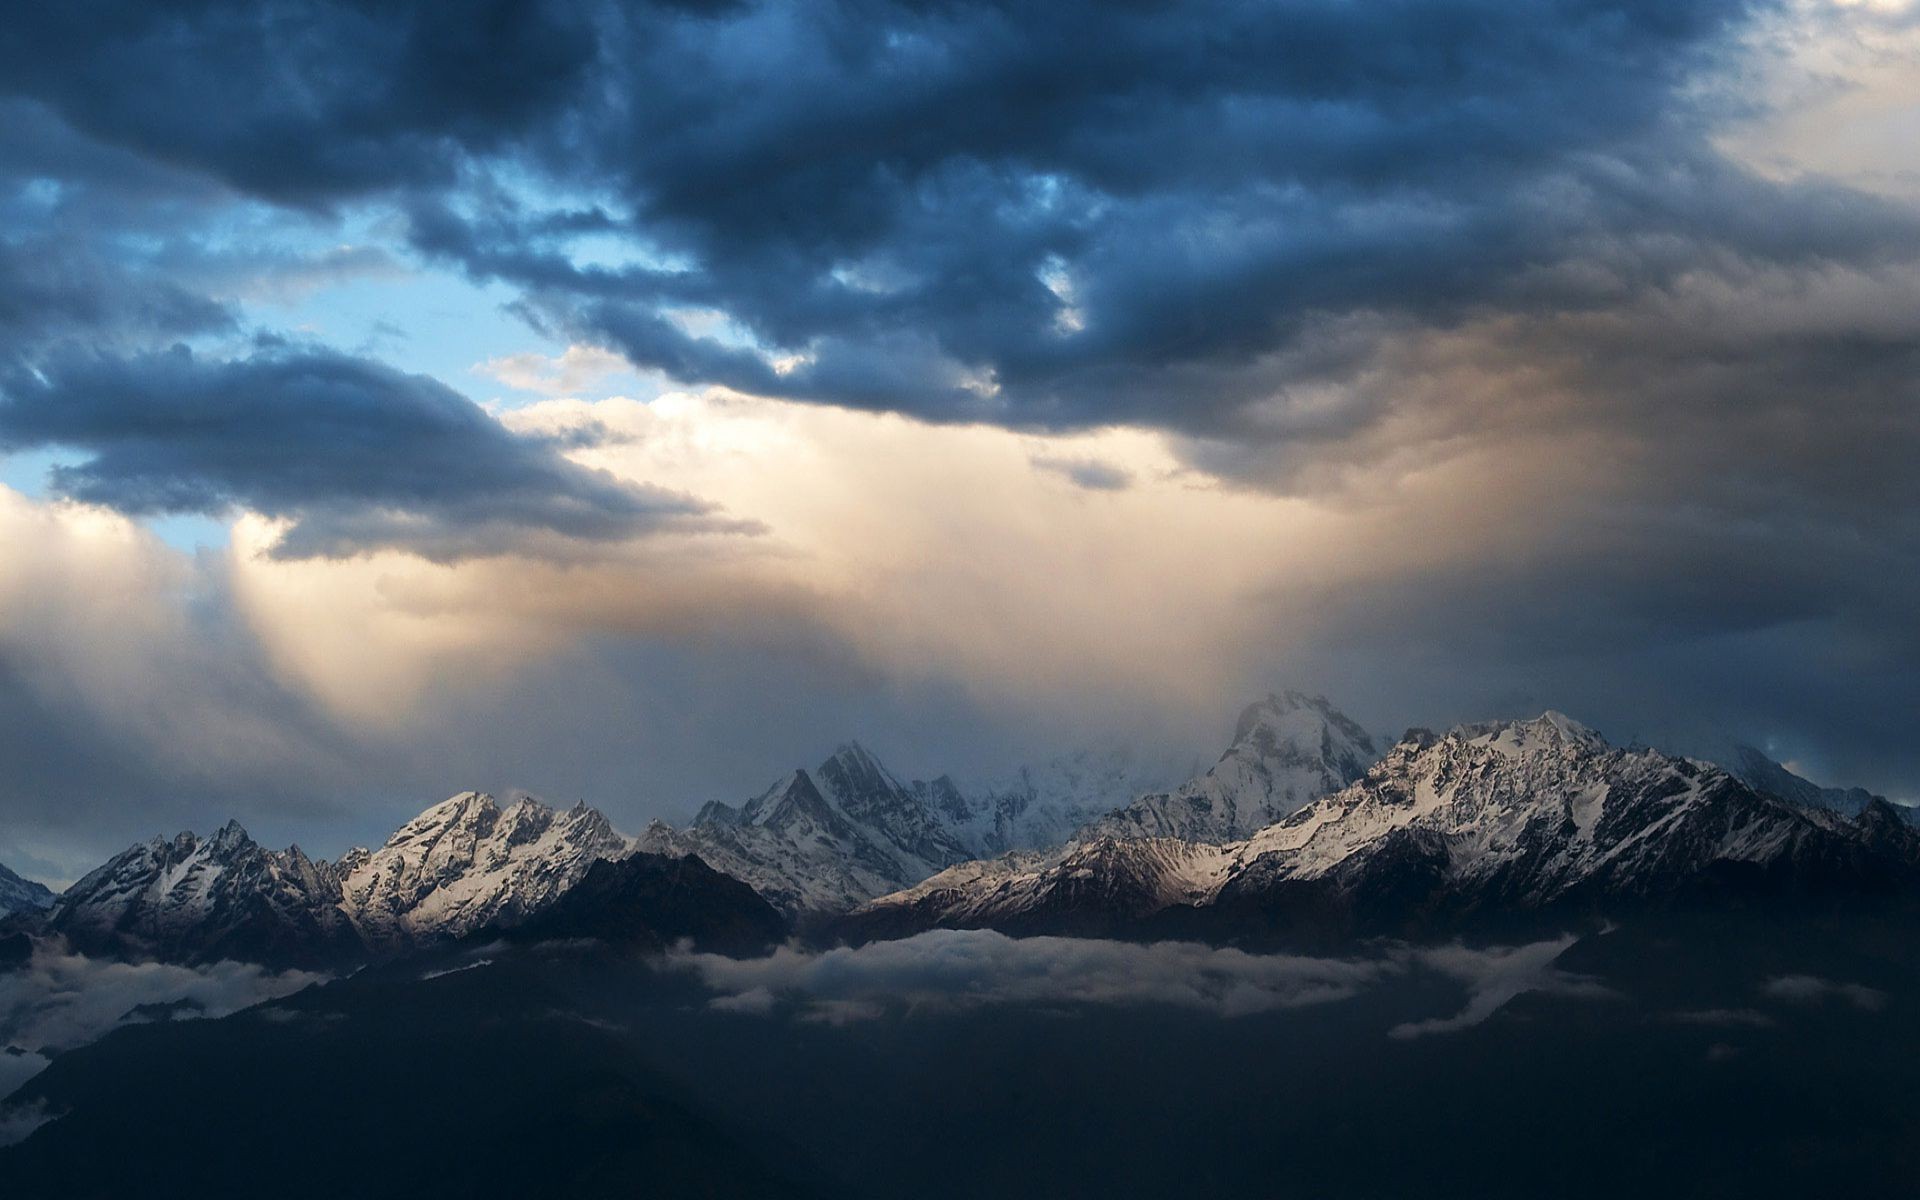 Storm clouds over the mountain peaks Widescreen Wallpaper   3514